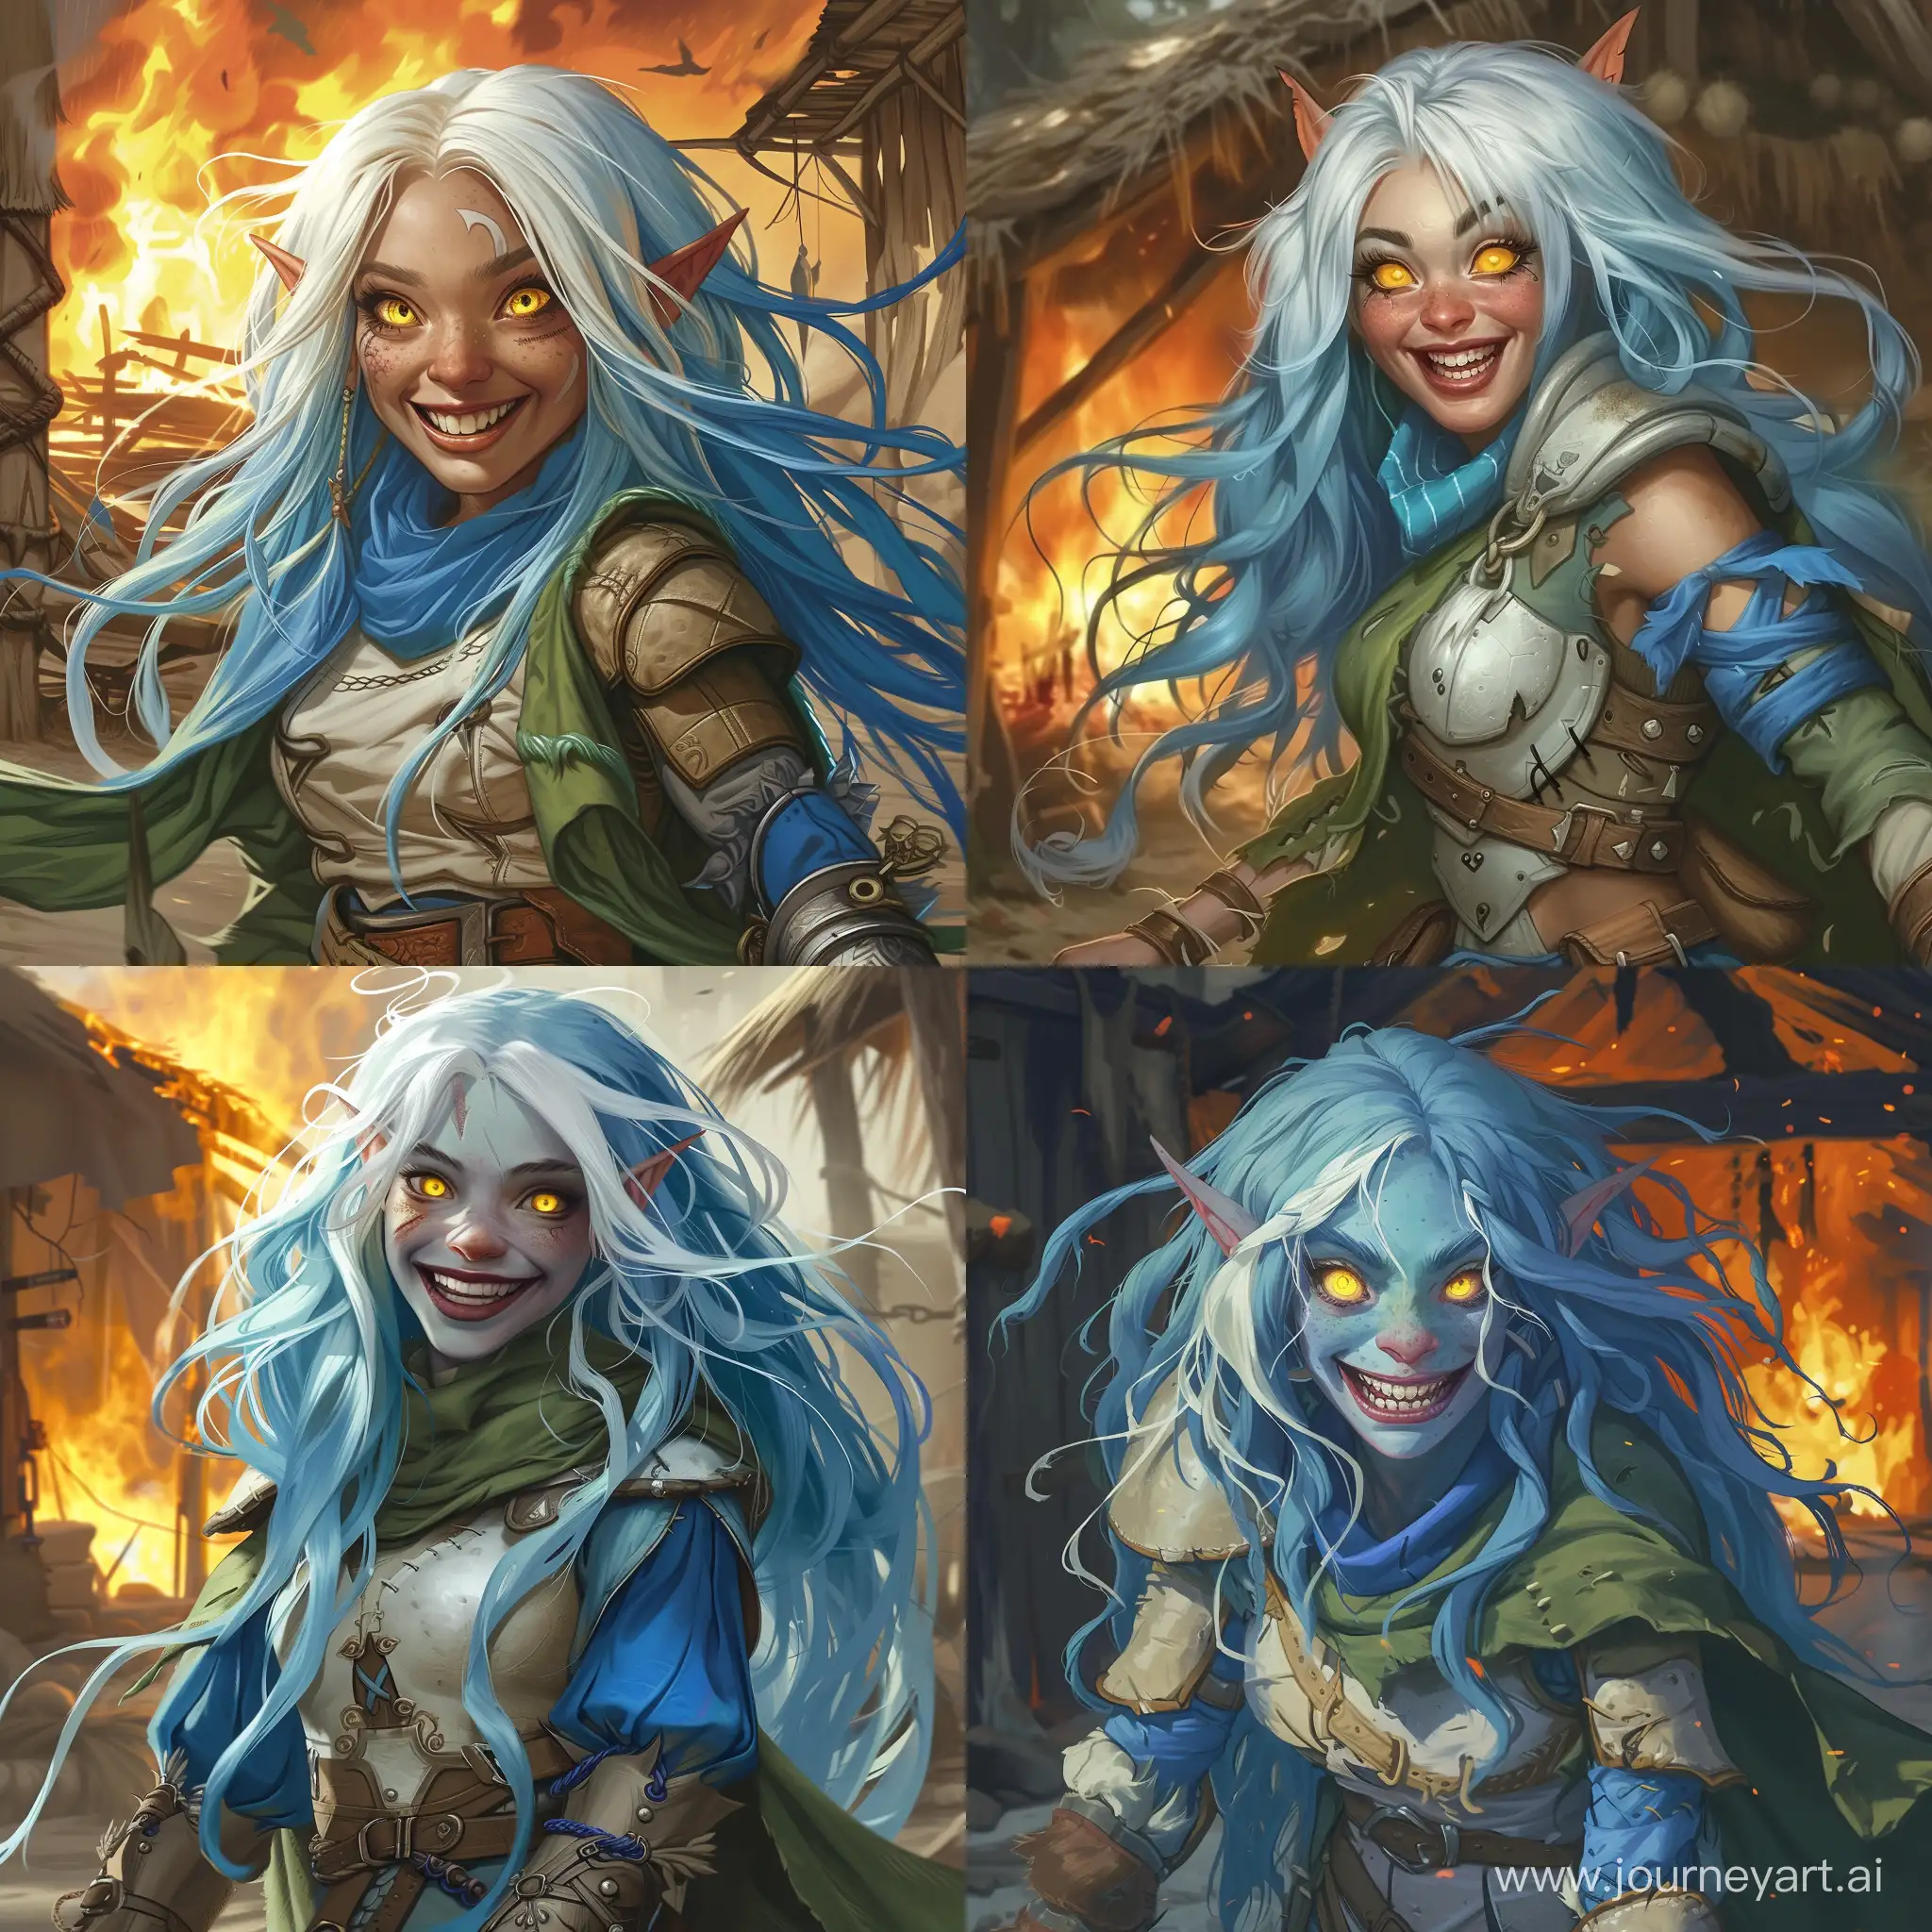 Half-elf girl with long voluminous blue hair, with white streaks and yellow eyes. Clear pale skin. Happy crazy smile on her face. She wears light leather armor with blue fabric elements, leather armored bracers, green cloak.  There is a fire in the background, a burning hut.